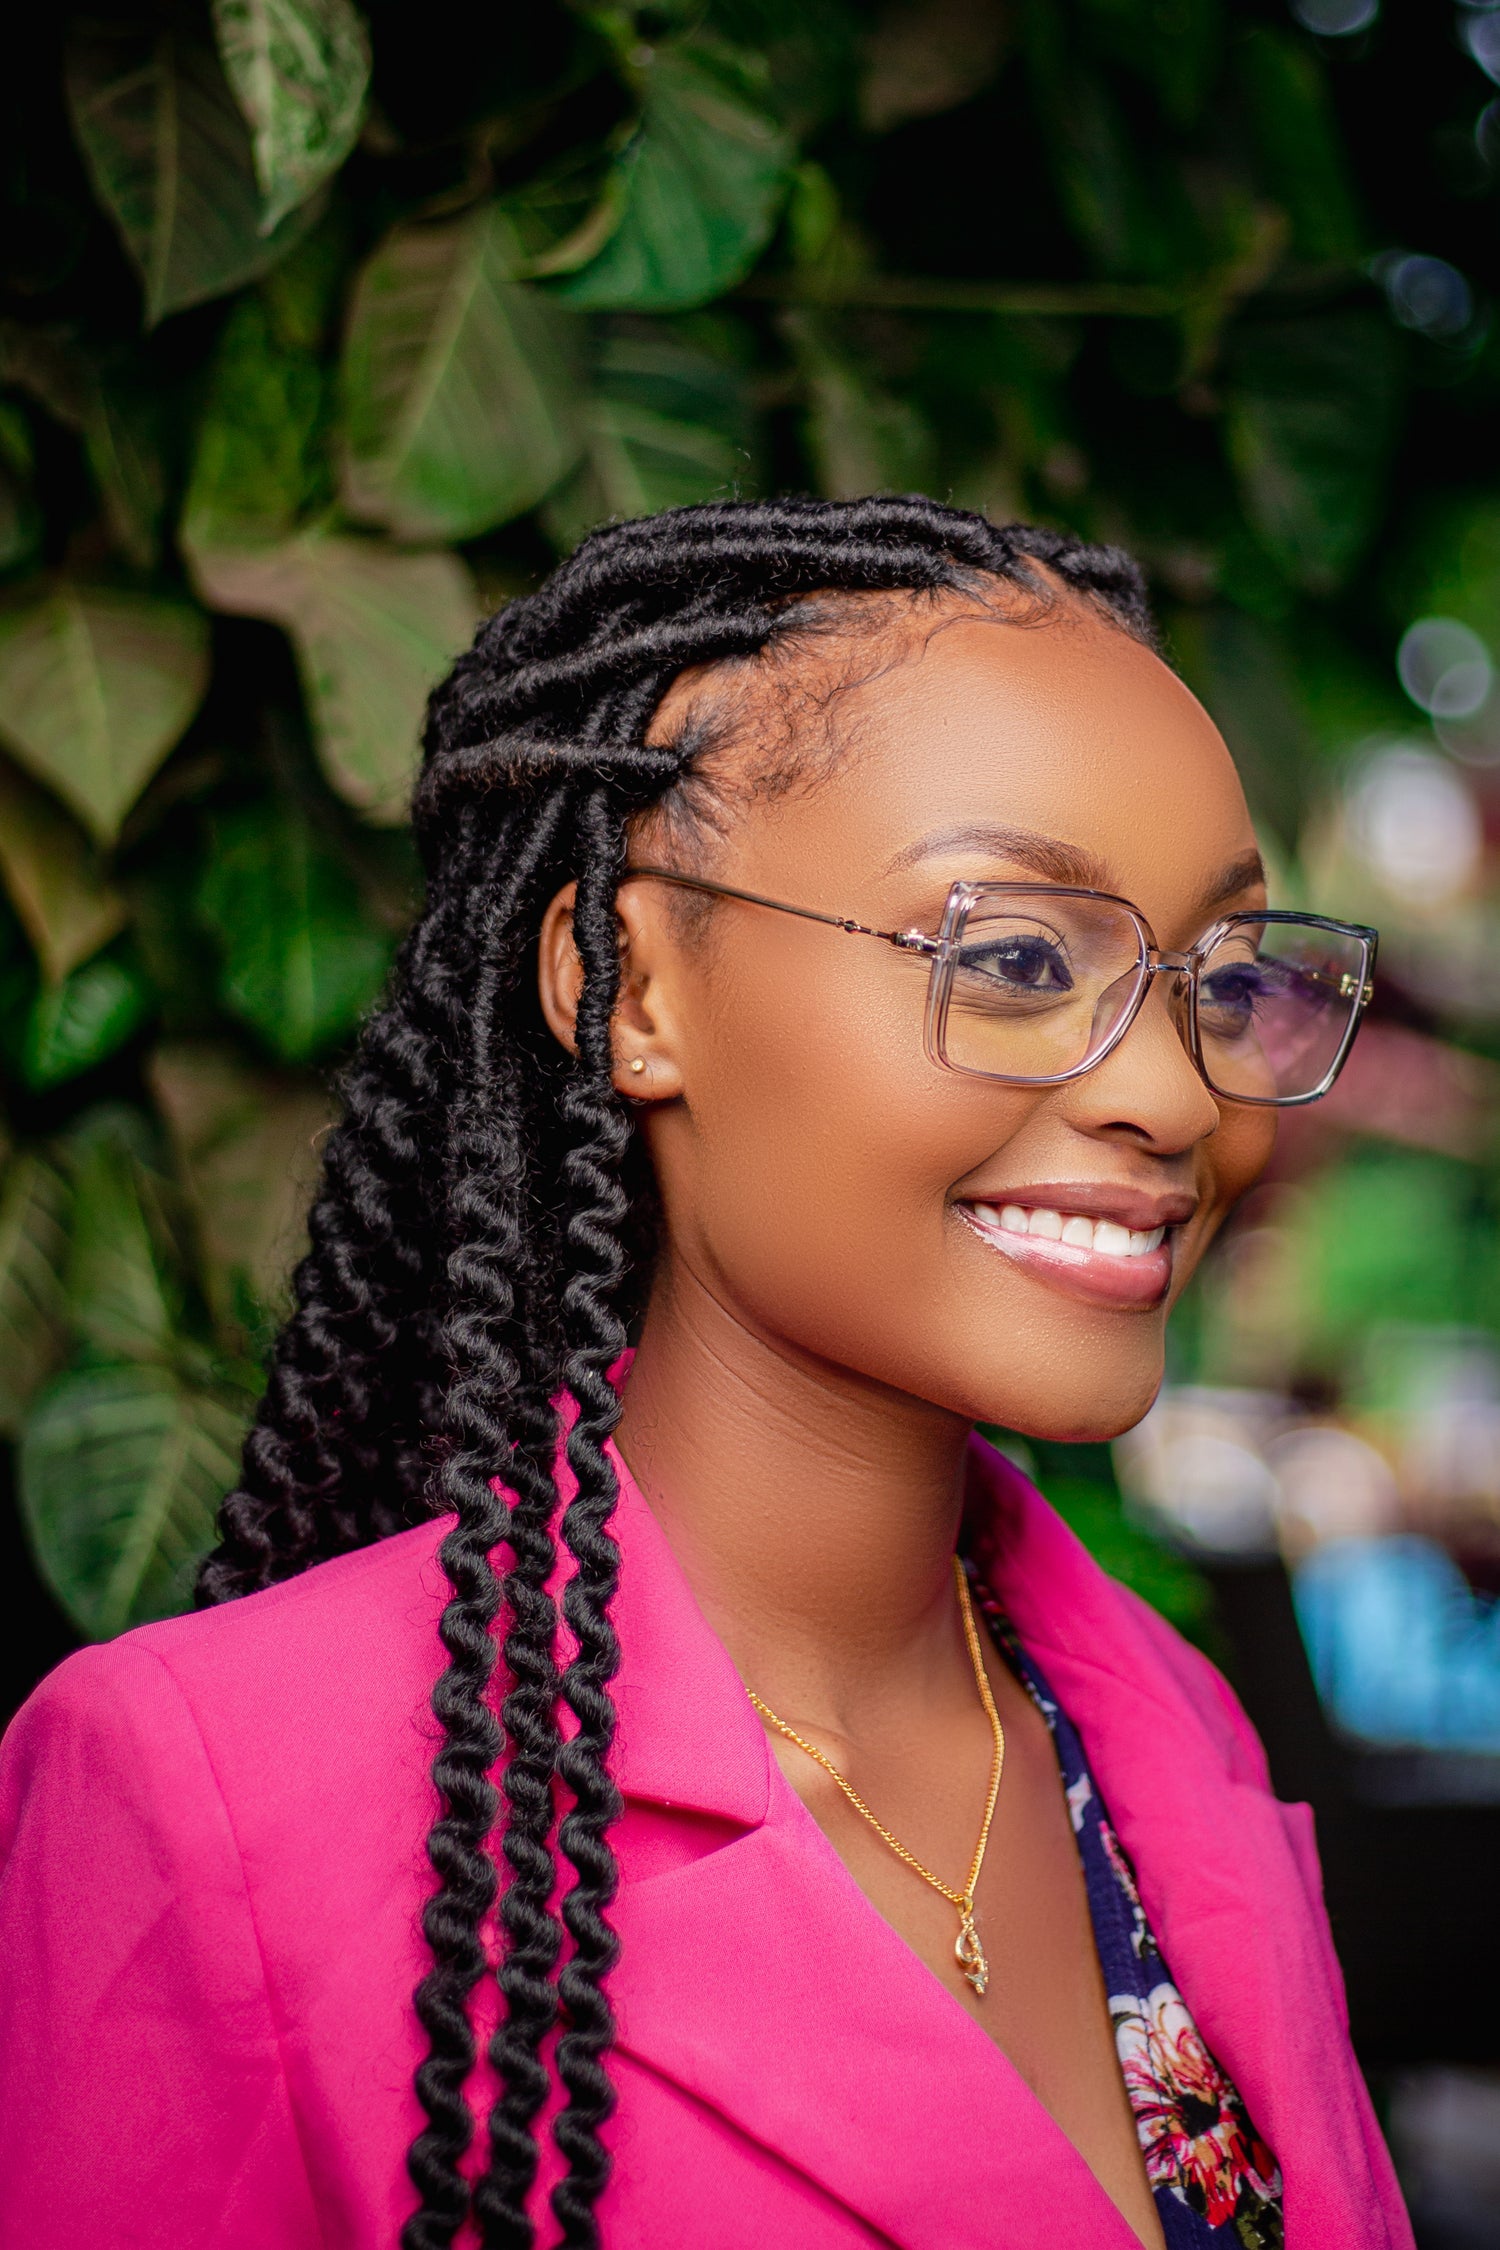 Get affordable spectacles in africa with Lapaire glasses